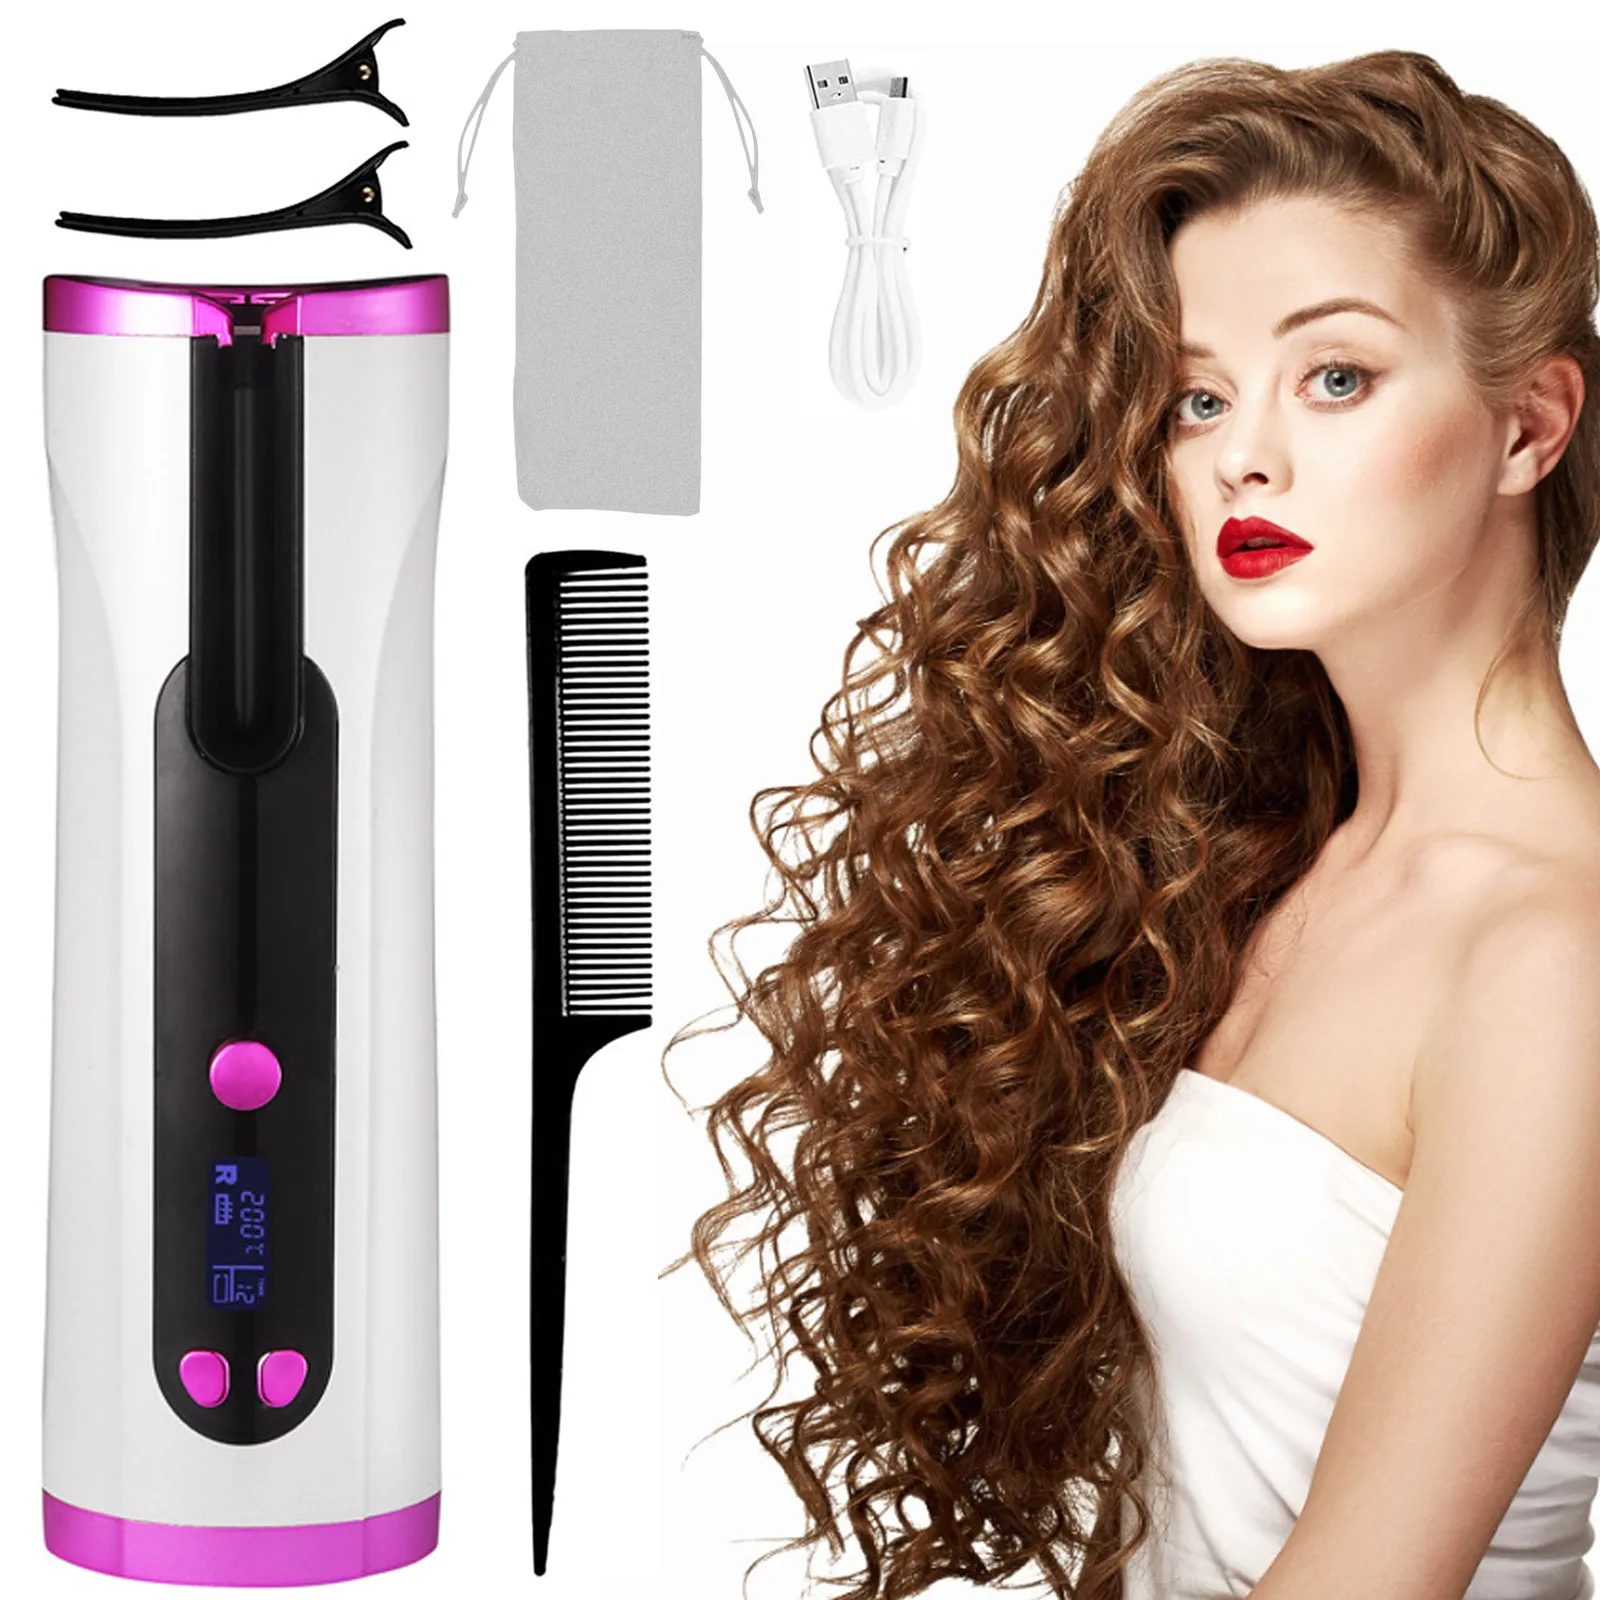 Portable Automatic Curling Iron Wireless Rechargeable Hair Curler Roller Quick Heating Smart Power Off for Wet Dry Hair wireless presenter multifunctional ppt page turning pen rechargeable speech projector pen for projector powerpoint ppt slide new